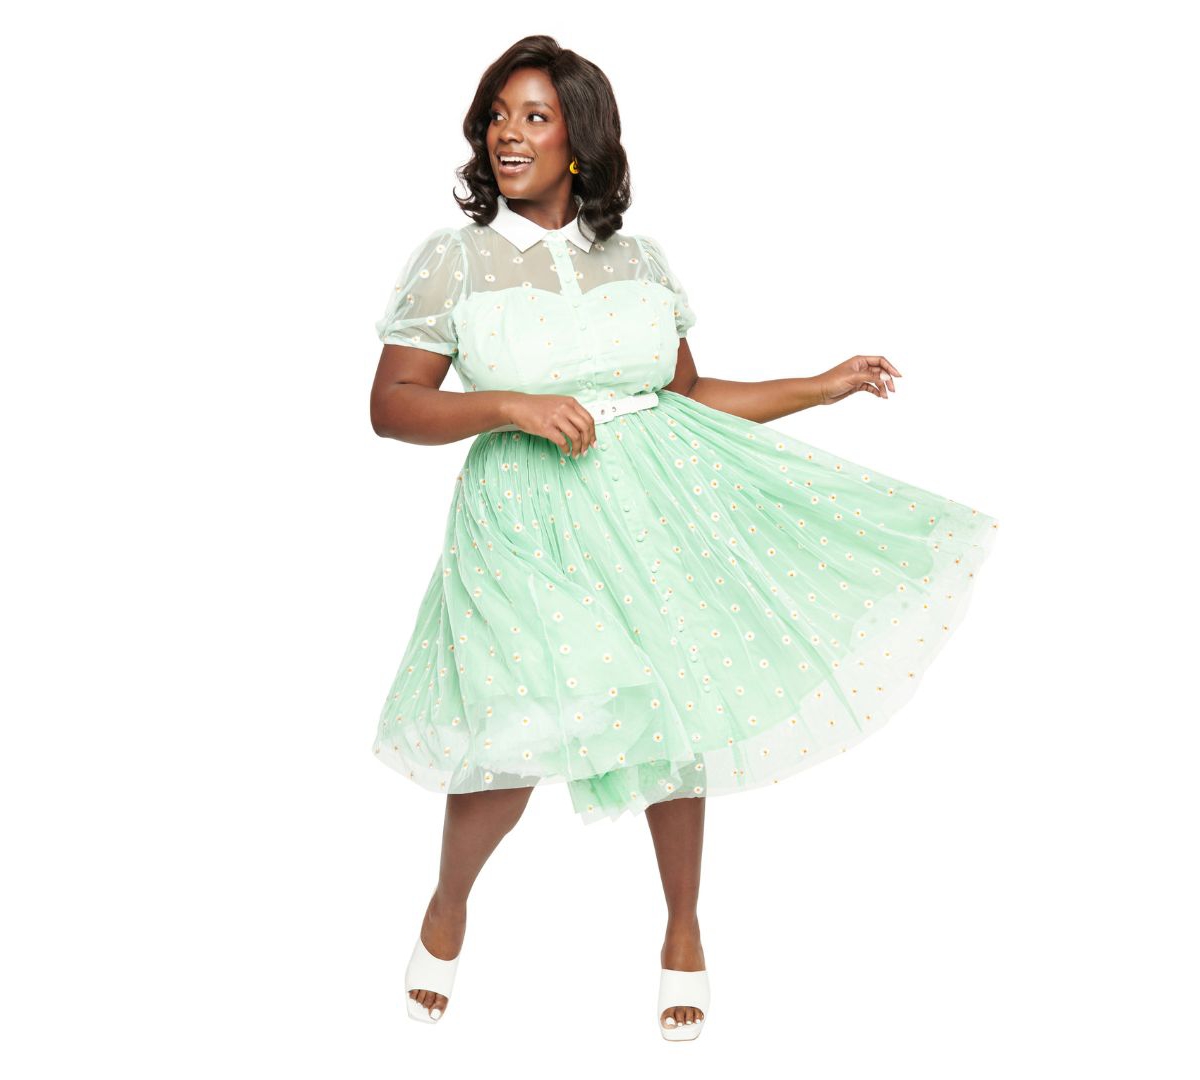 Plus Size 1950s Short Sleeve Collared Hollie Swing Dress - Green  white daisy print